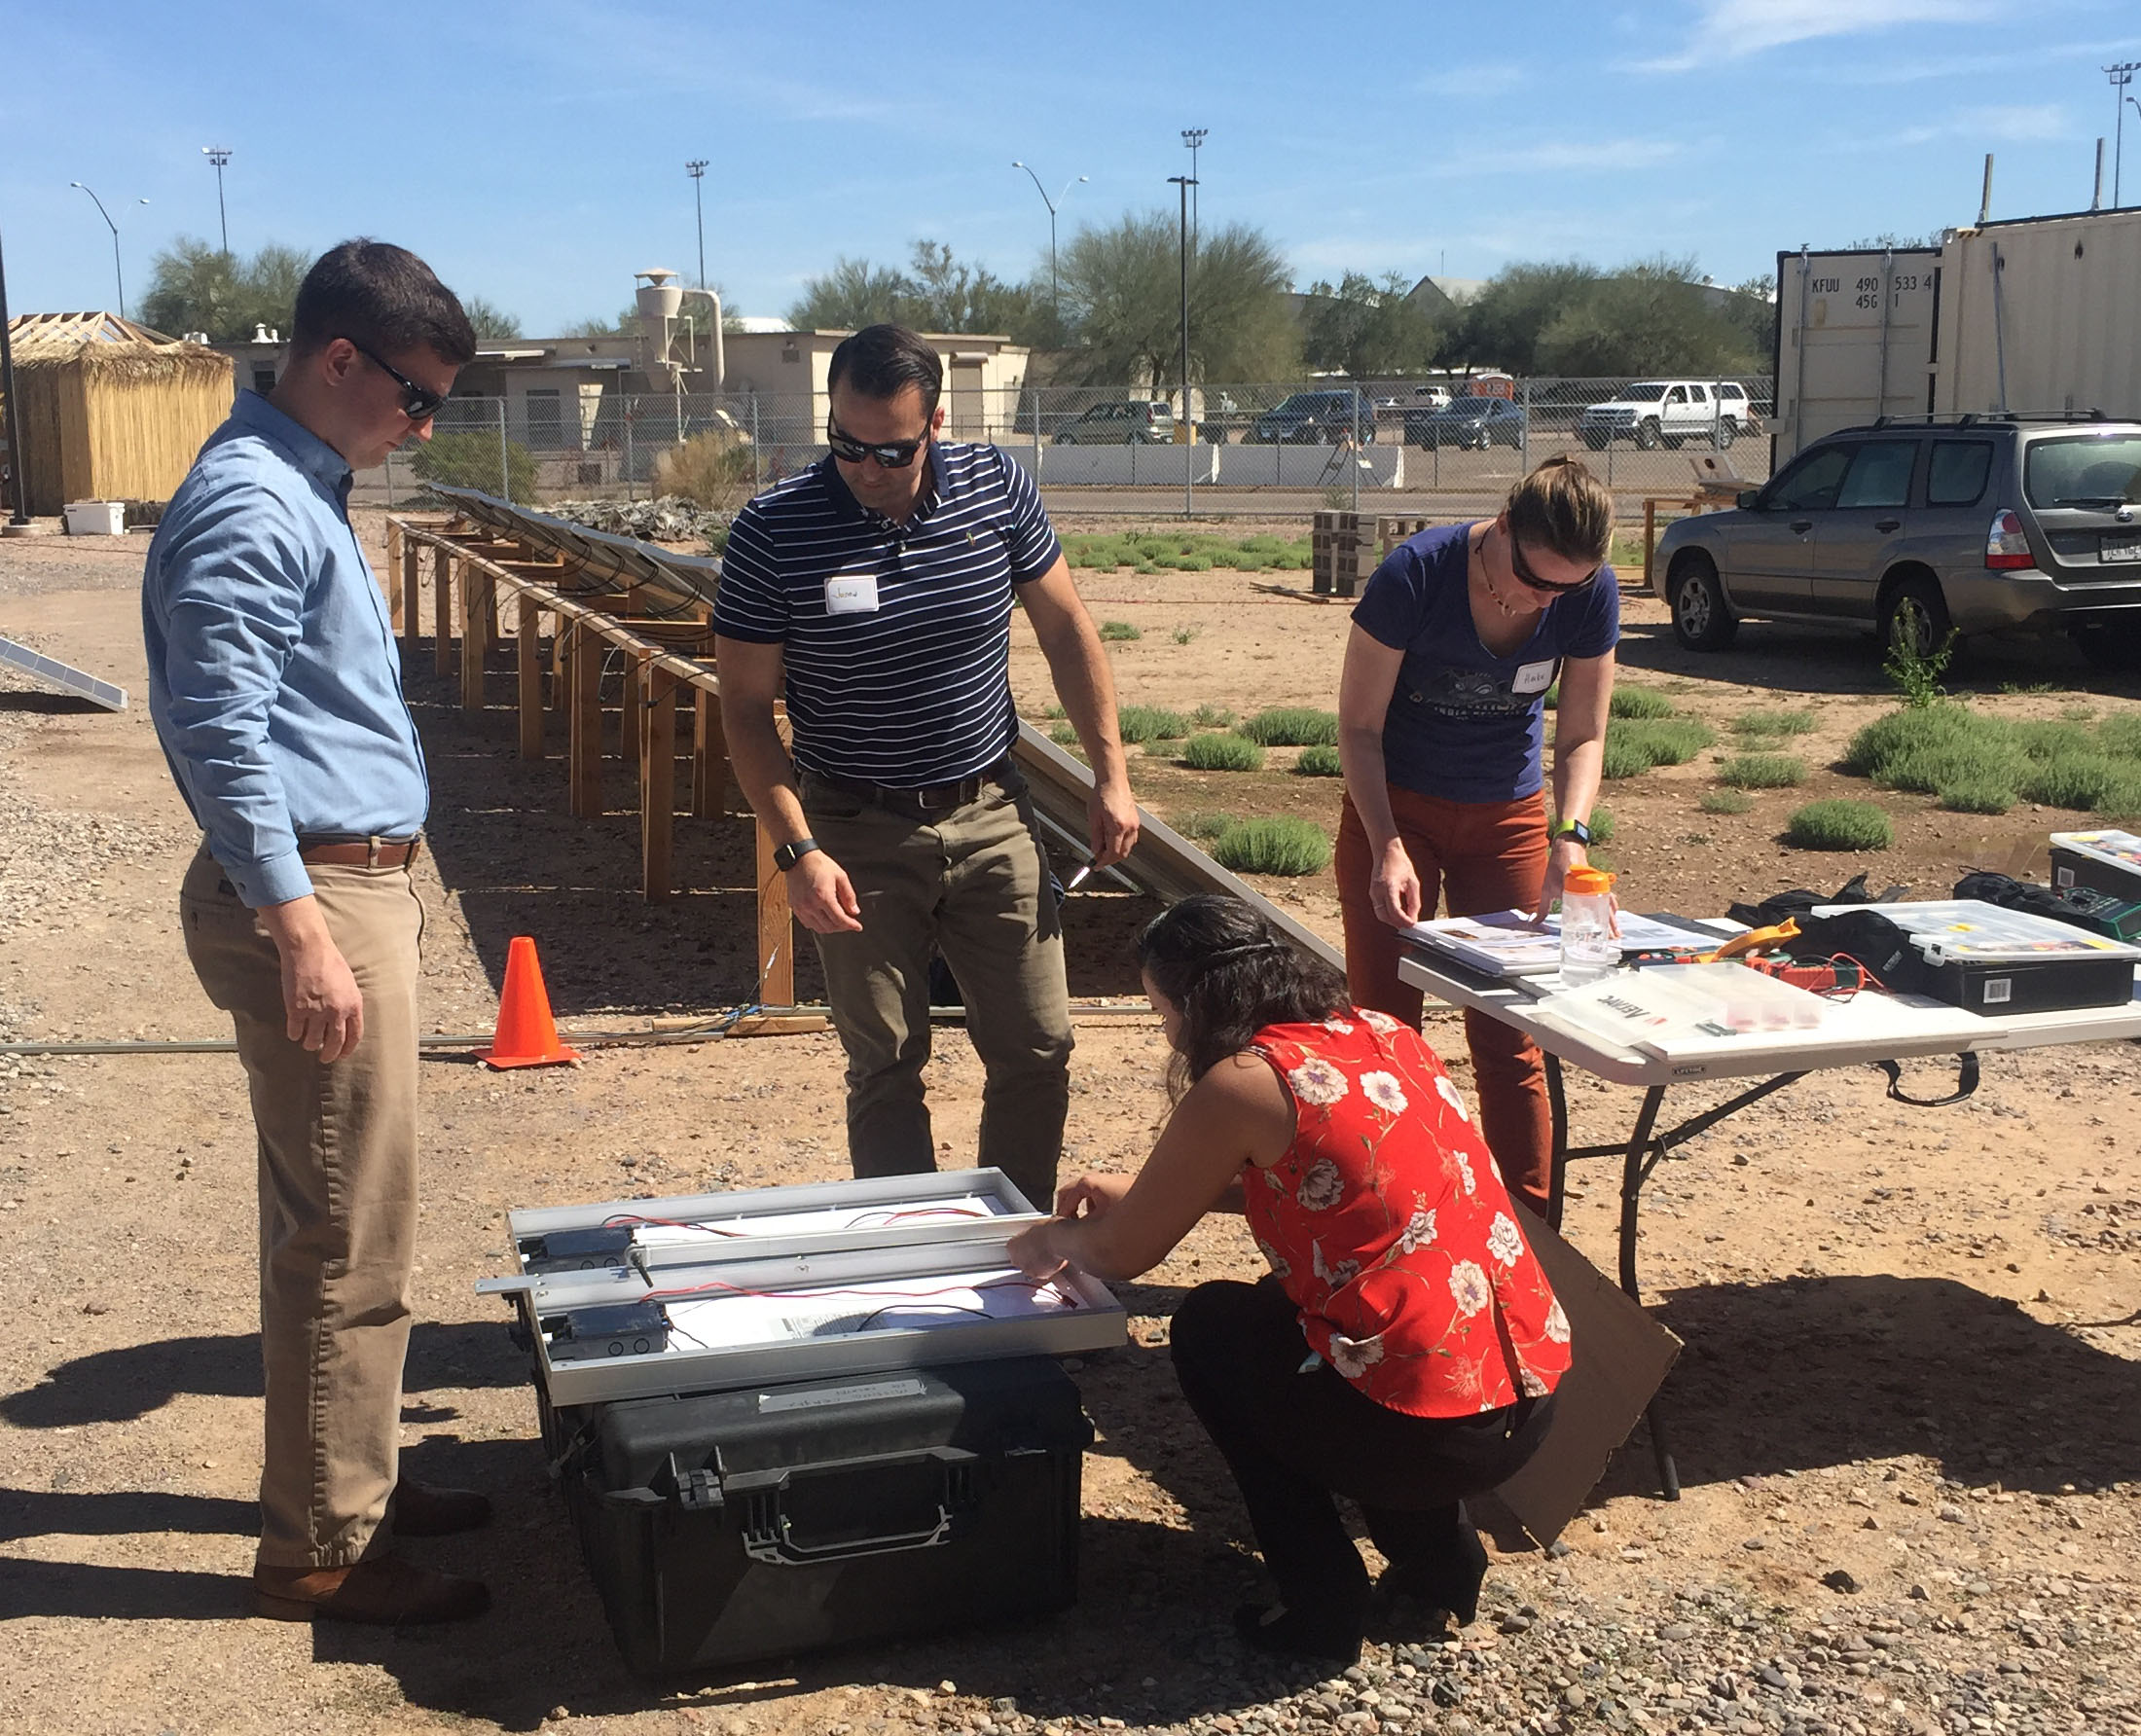 Microgrid Boot Camp - a Learning-by-Doing Experience